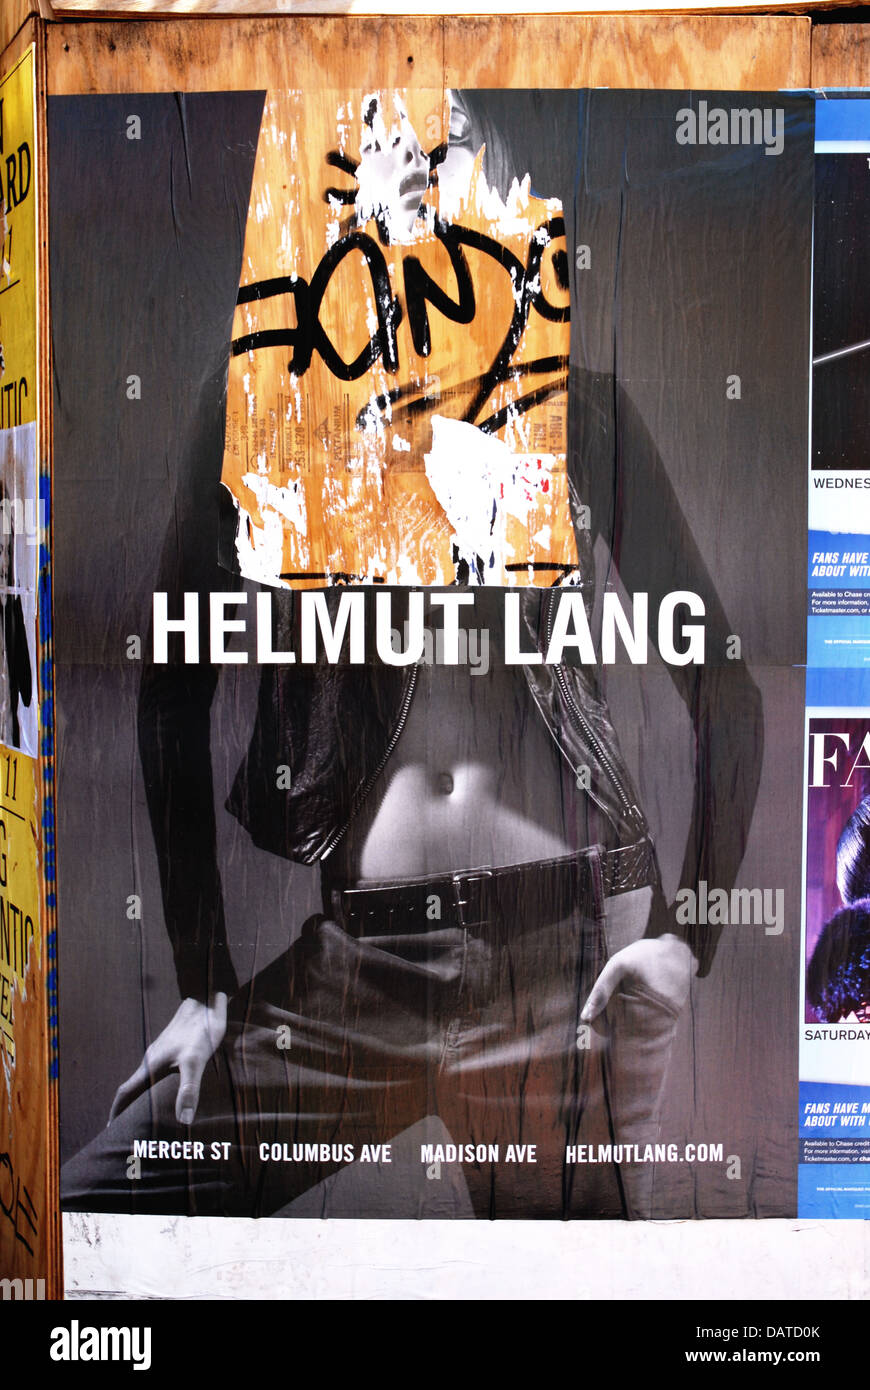 Helmut lang Cut Out Stock Images & Pictures - Alamy